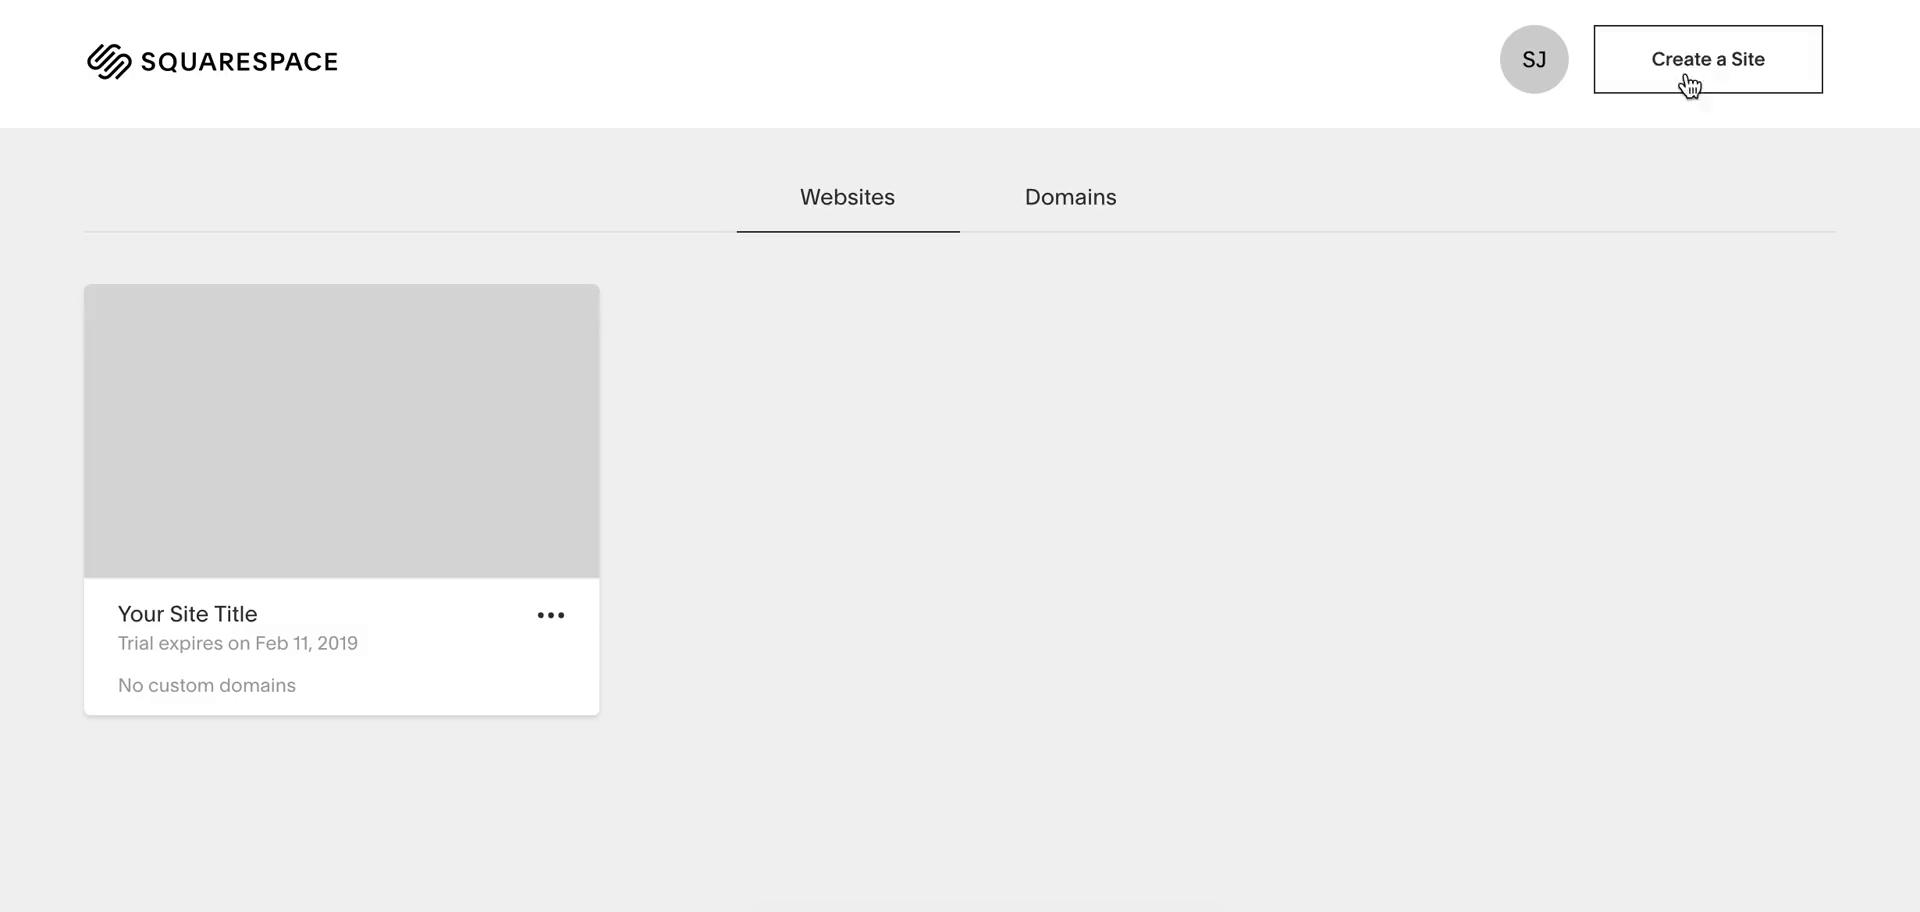 Screenshot of on Creating a website on Squarespace user flow